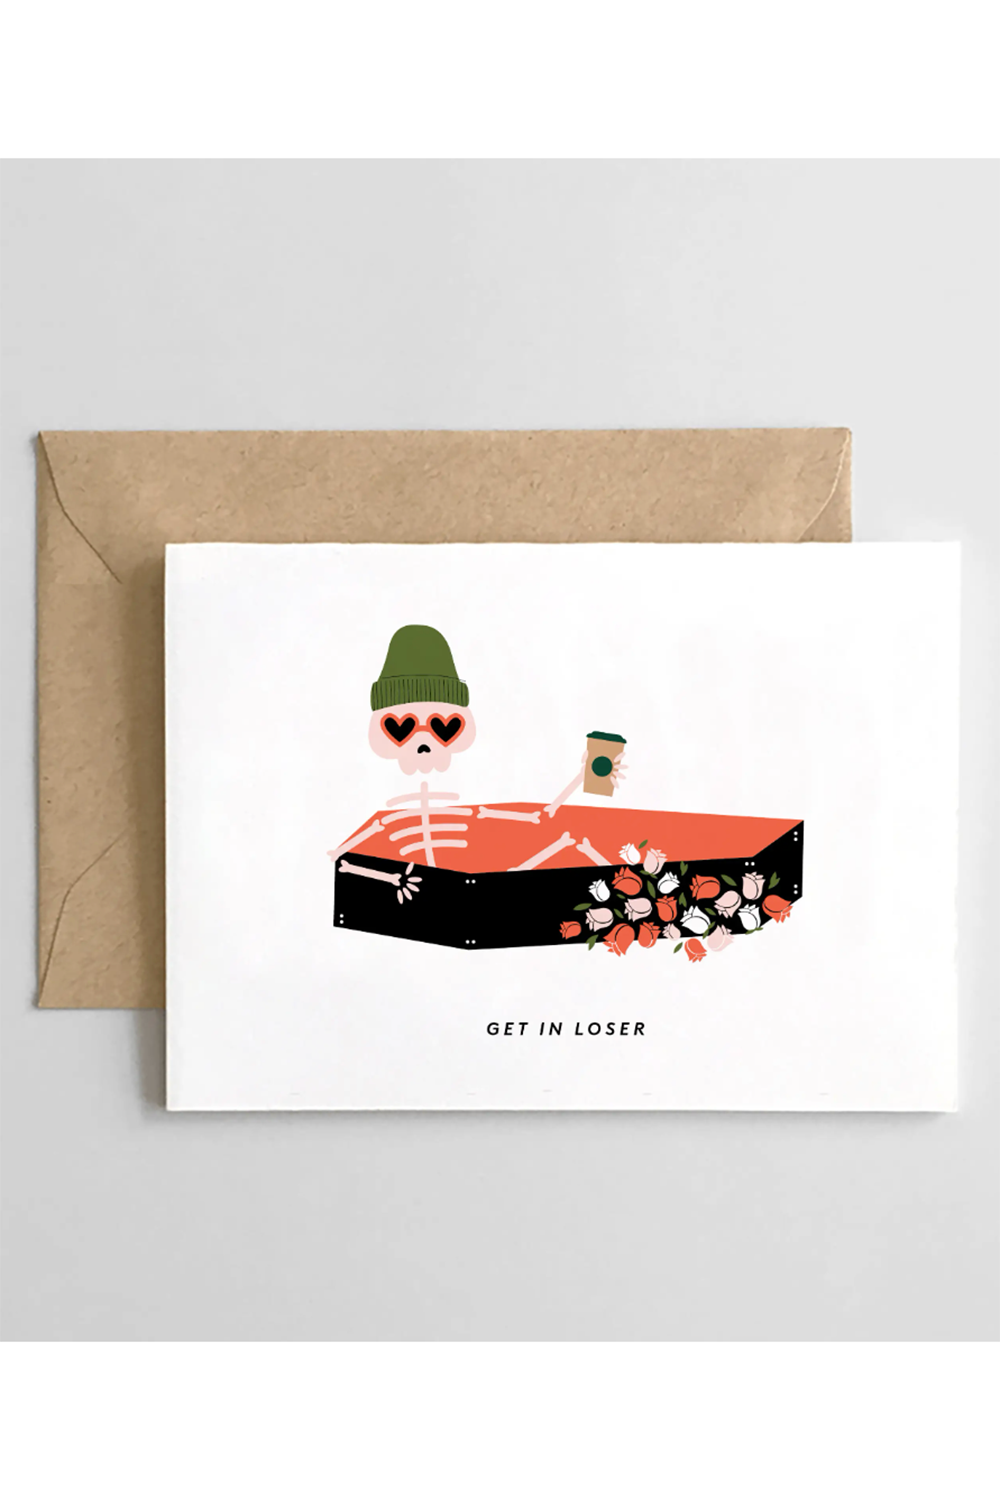 MB Halloween Greeting Card - Get in Loser (Coffin)